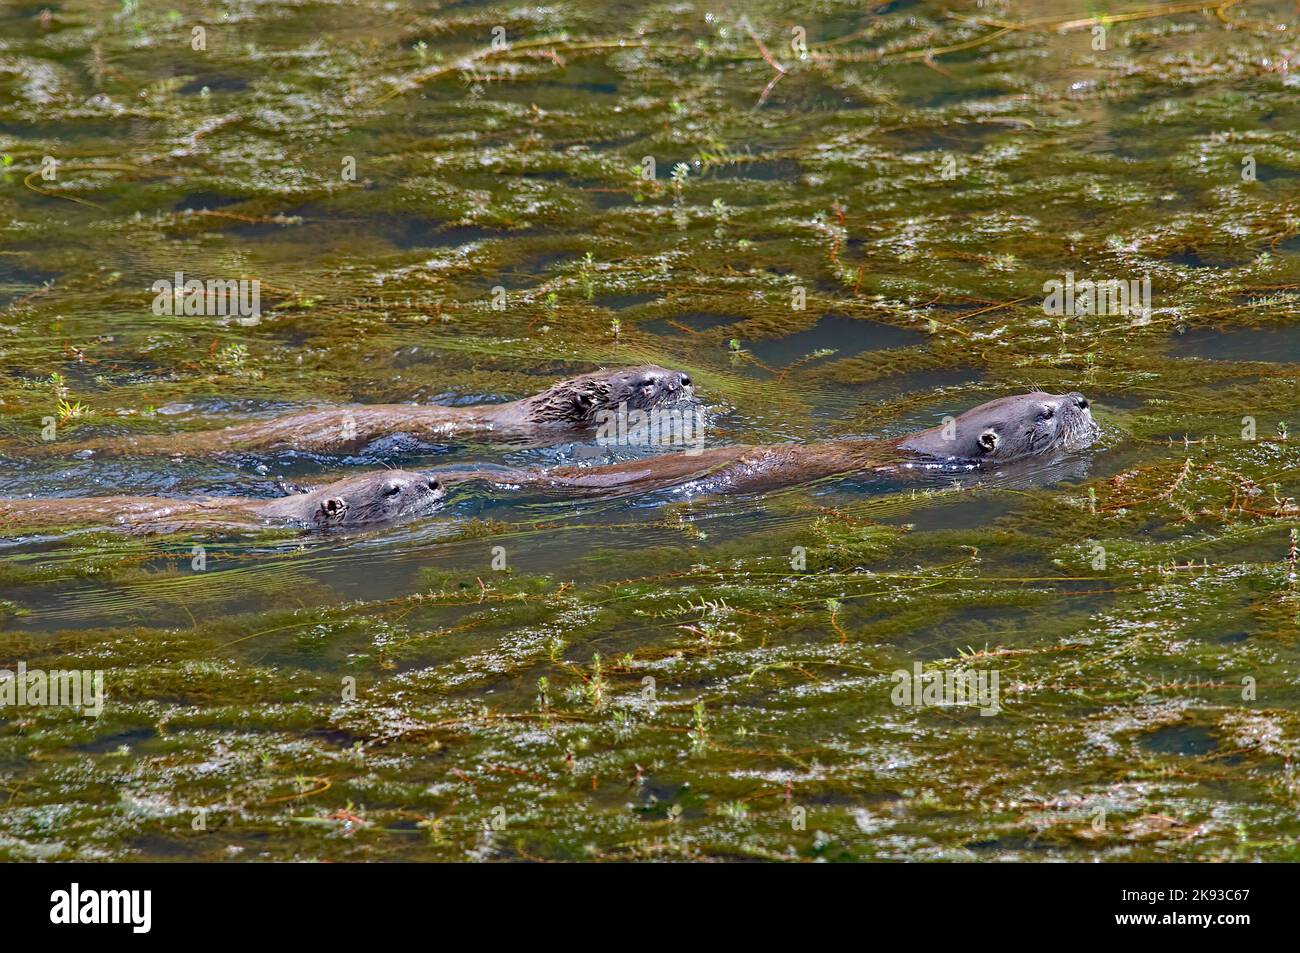 Three North American River Otters (Lontra canadensis) - swimming together surrounded by Eurasian watermilfoil weed (Myriophyllum spicatum). Stock Photo